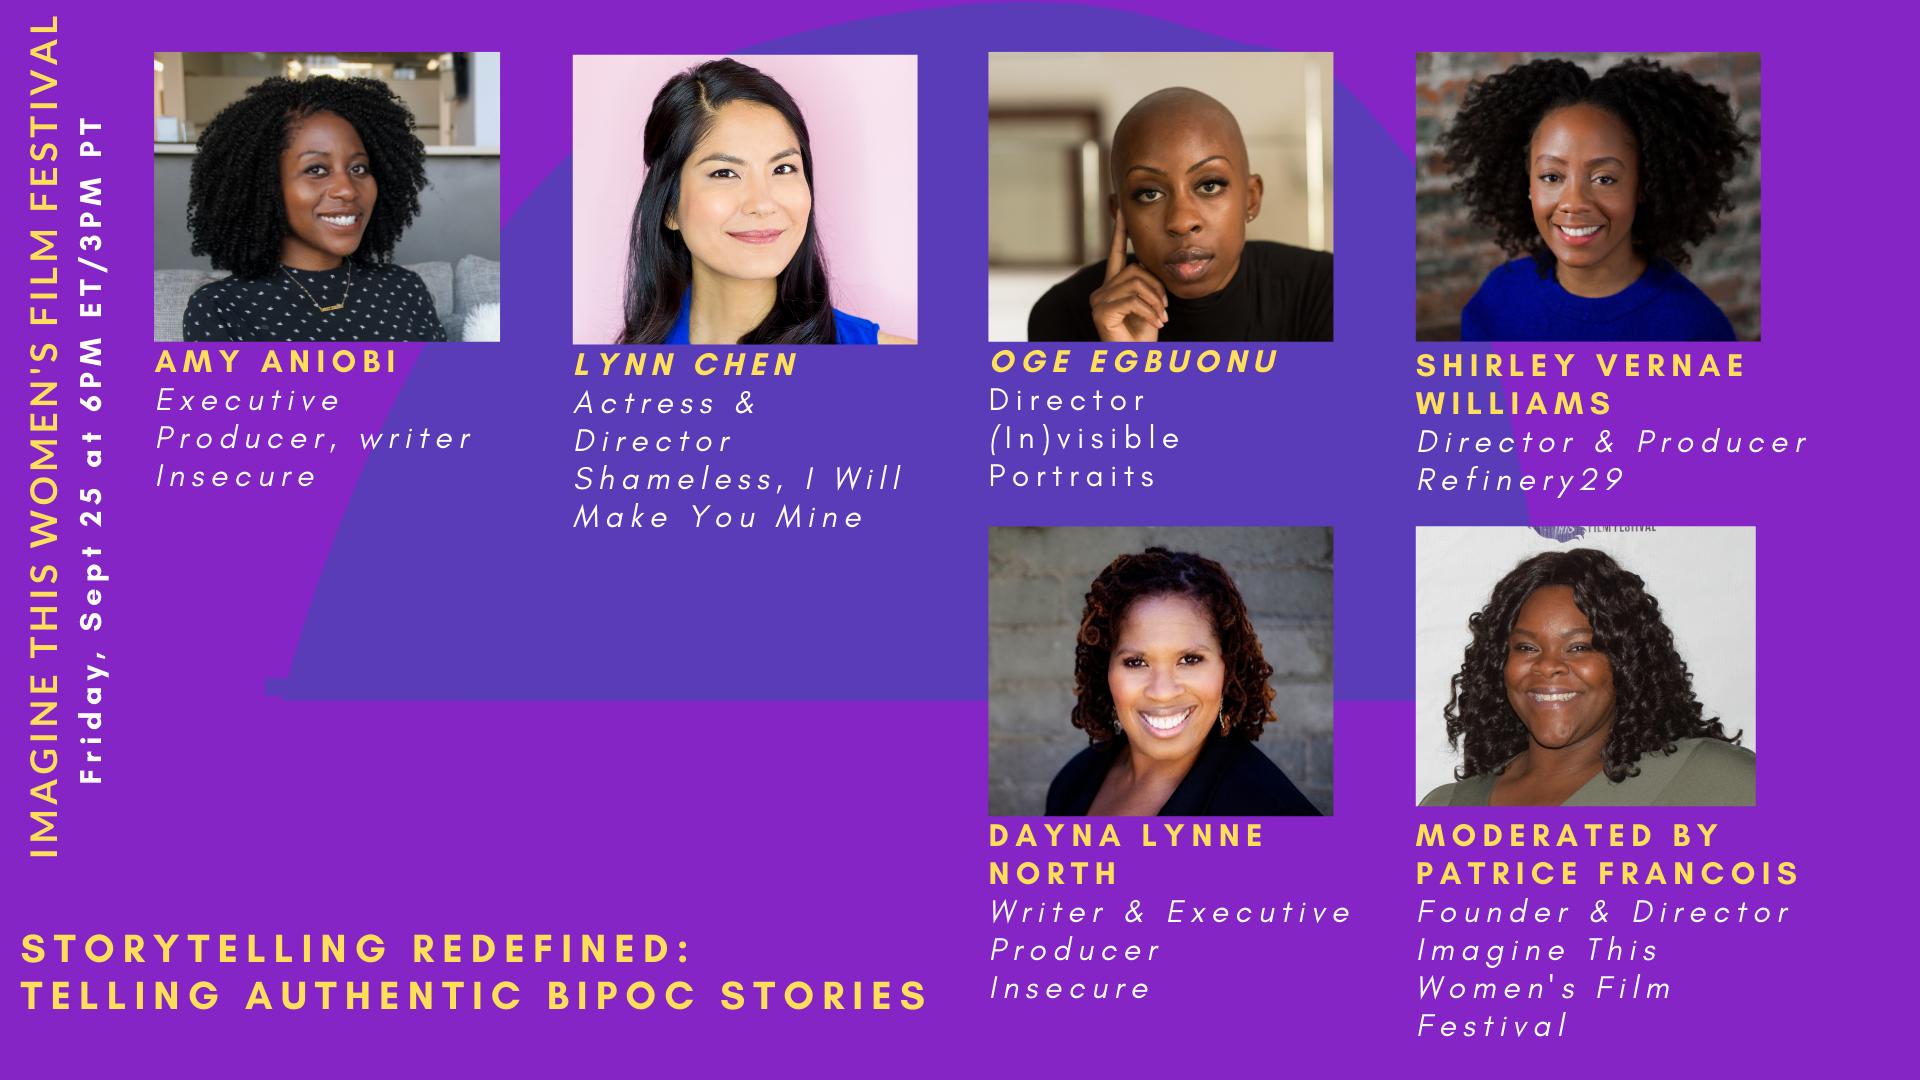 Imagine This Women's Film Festival: Storytelling Redefined: Telling Authentic BIPOC Stories